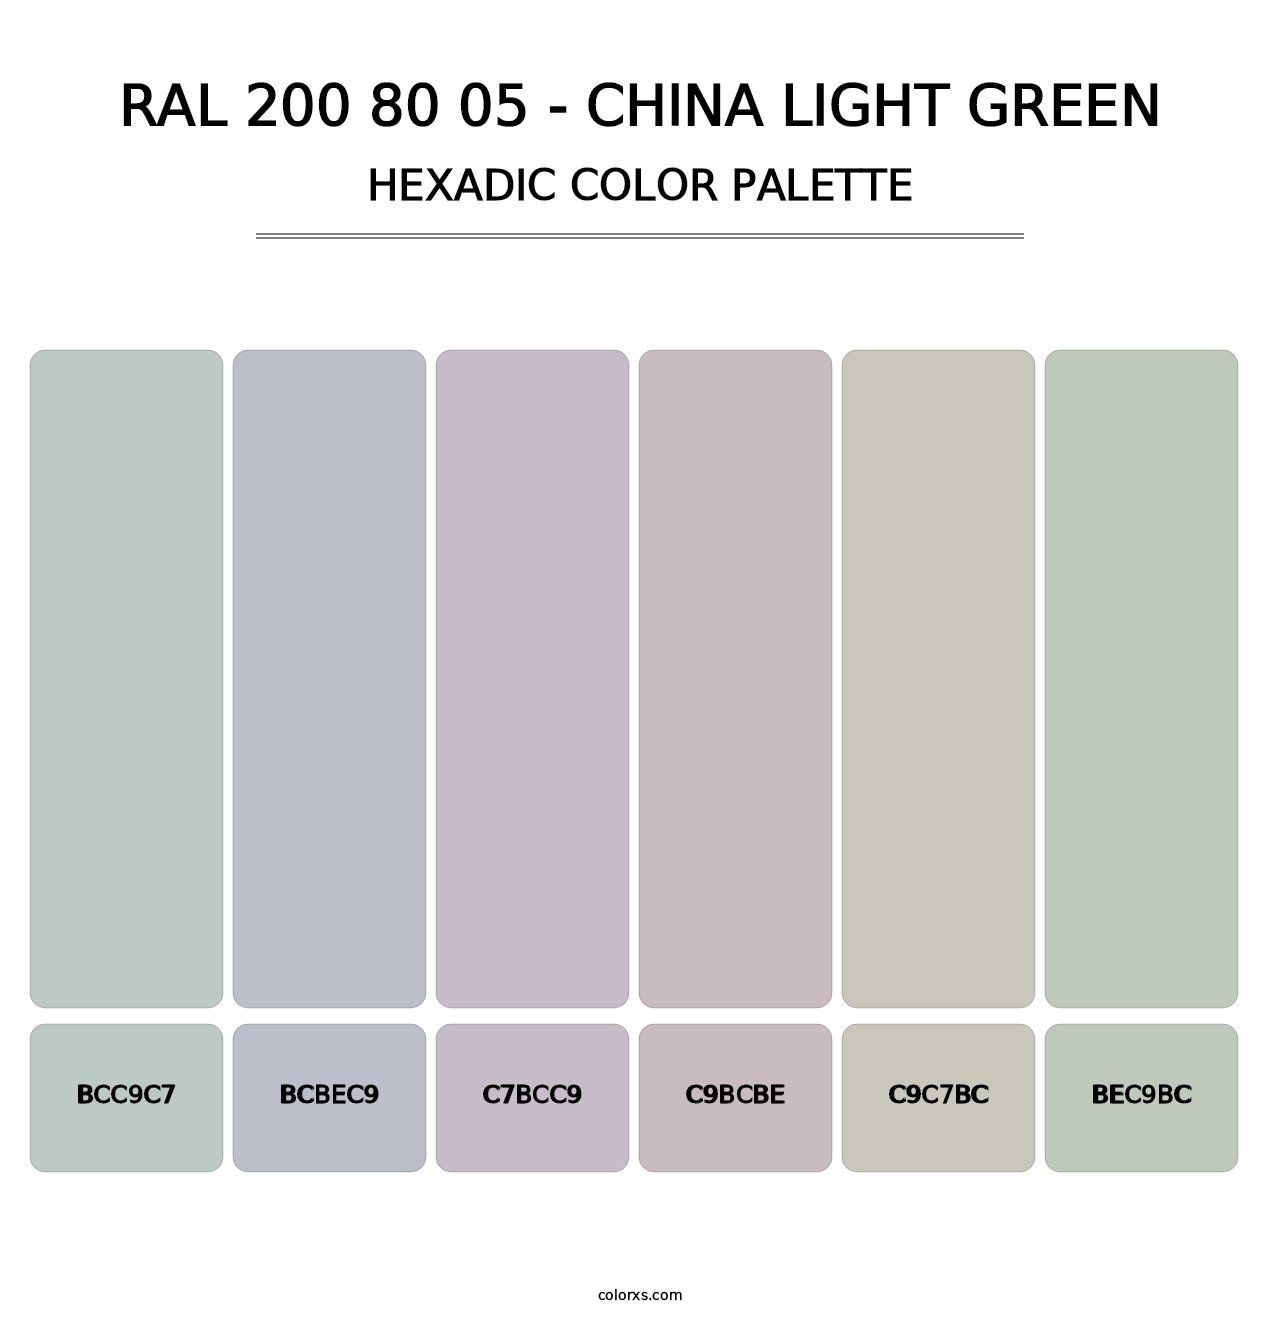 RAL 200 80 05 - China Light Green - Hexadic Color Palette